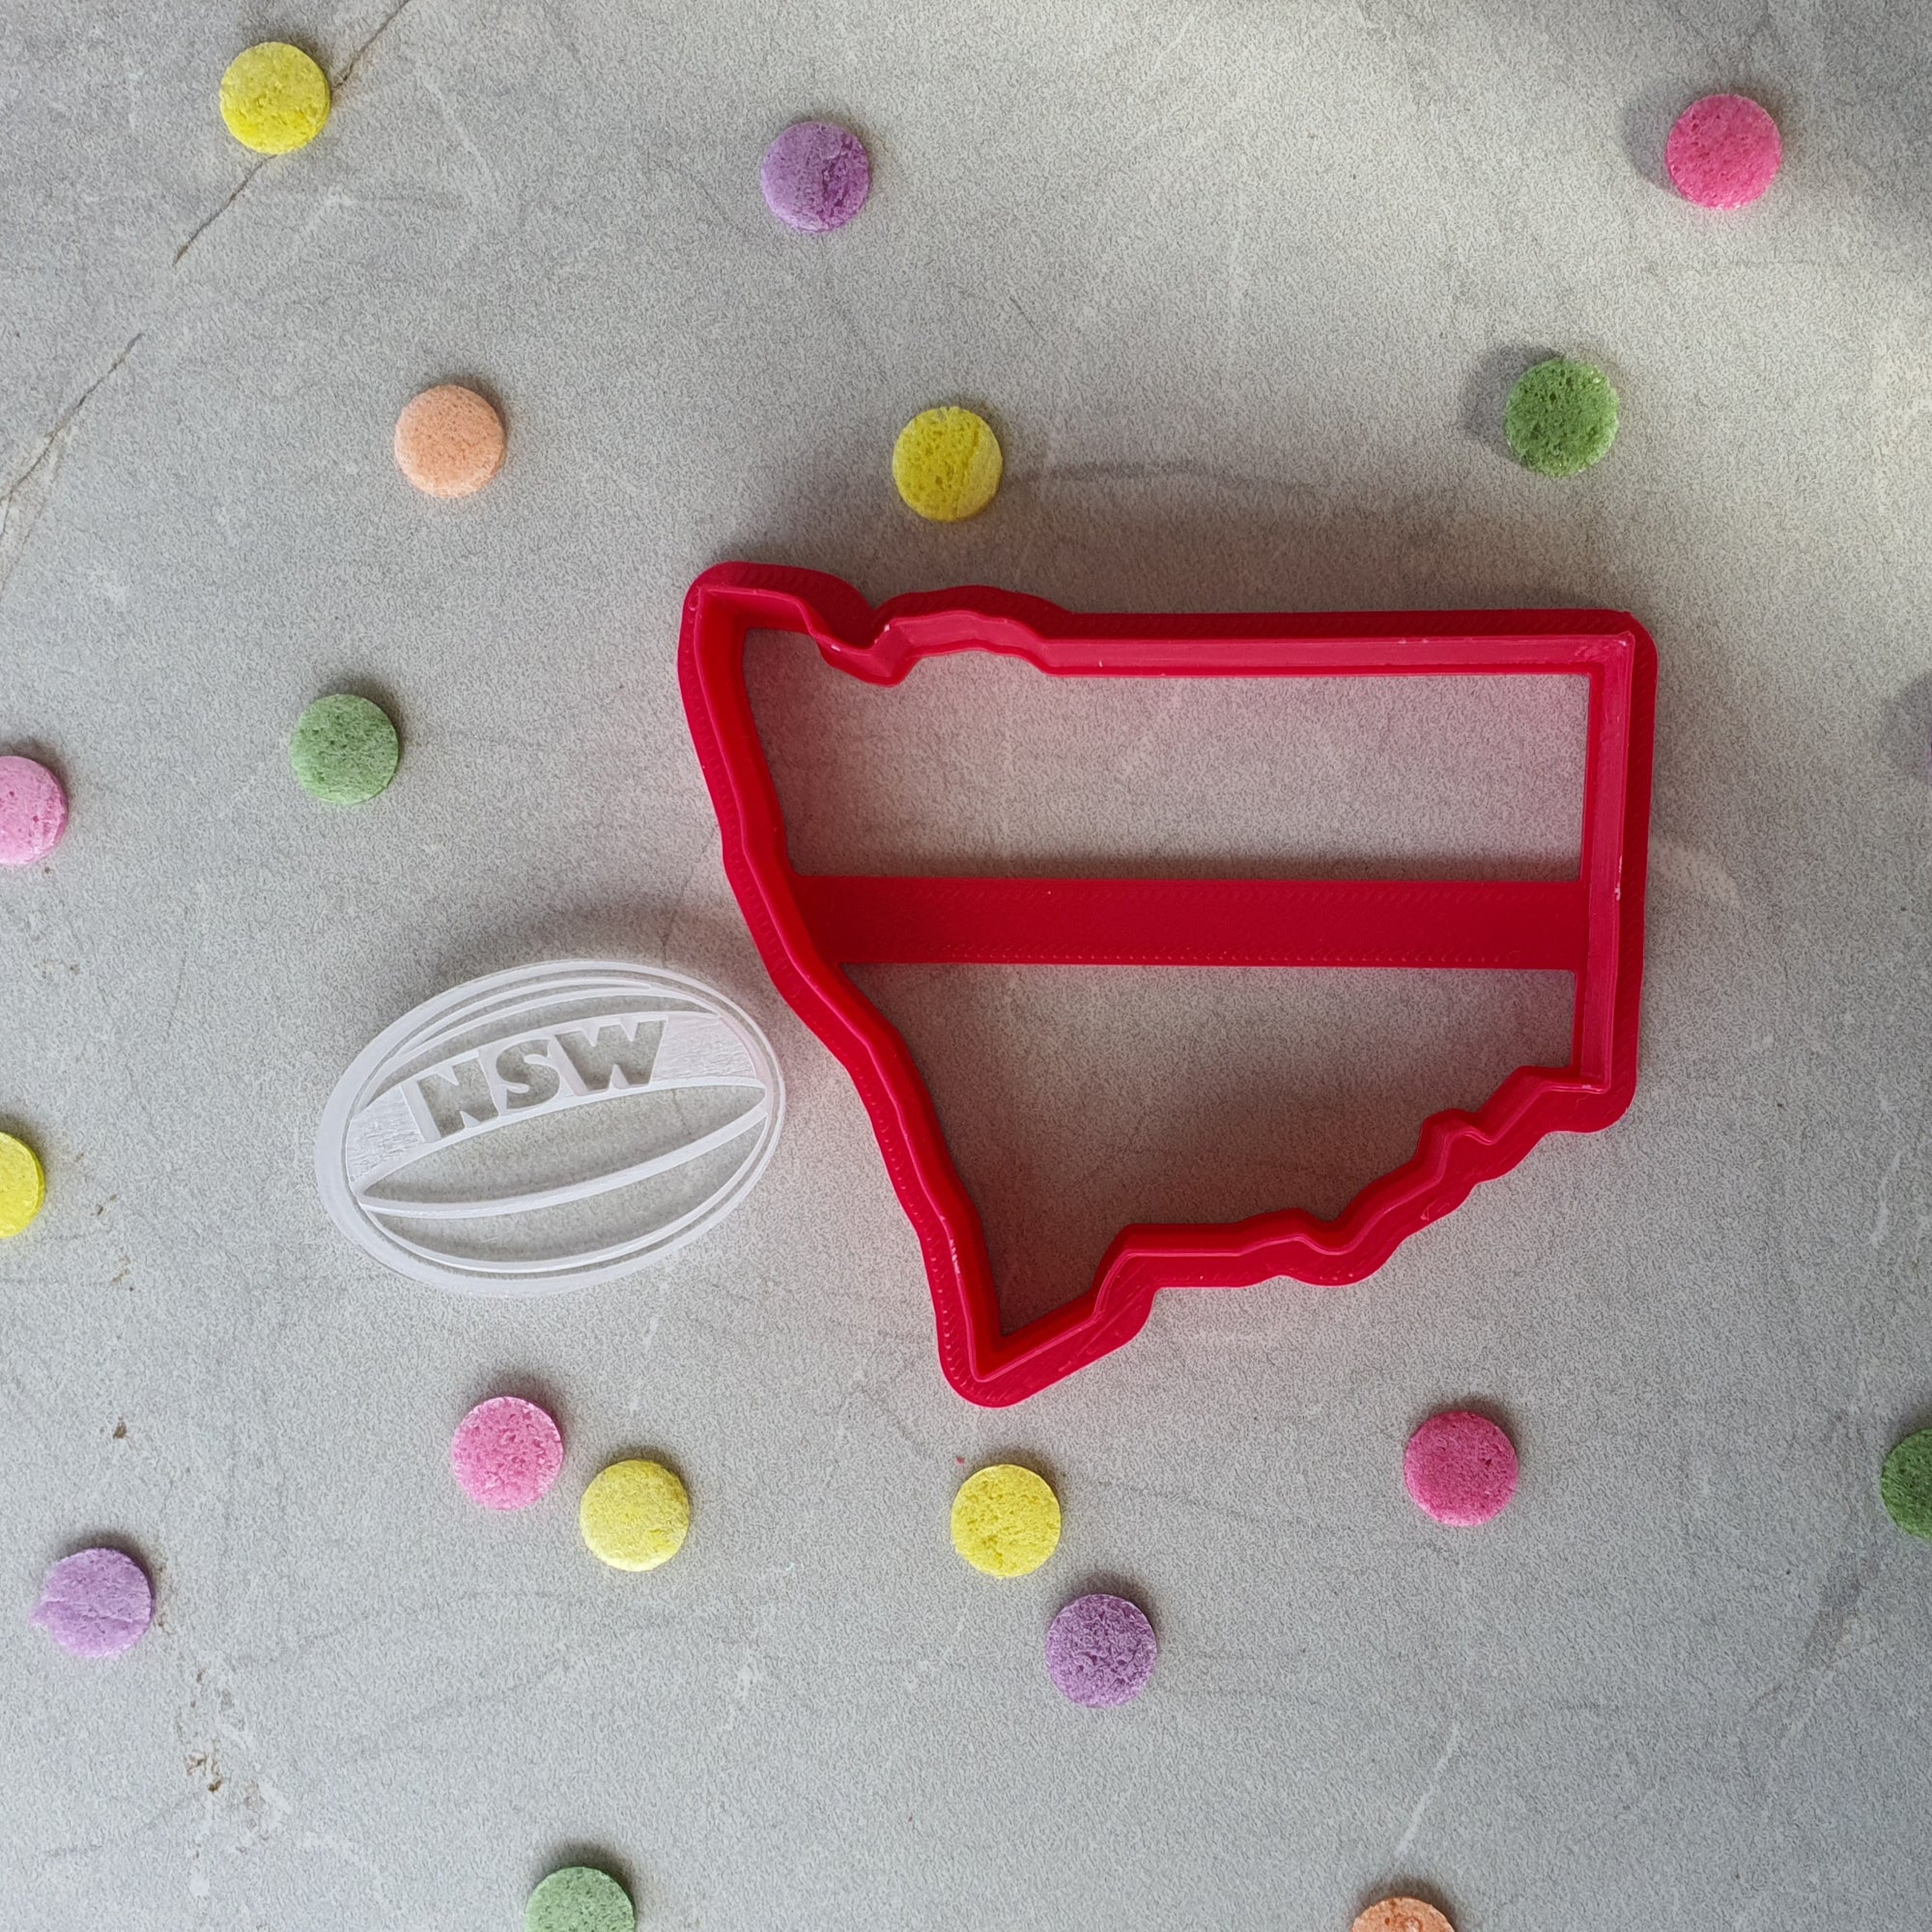 NSW State of Origin Supporters Cookie Cutter & Embosser Set